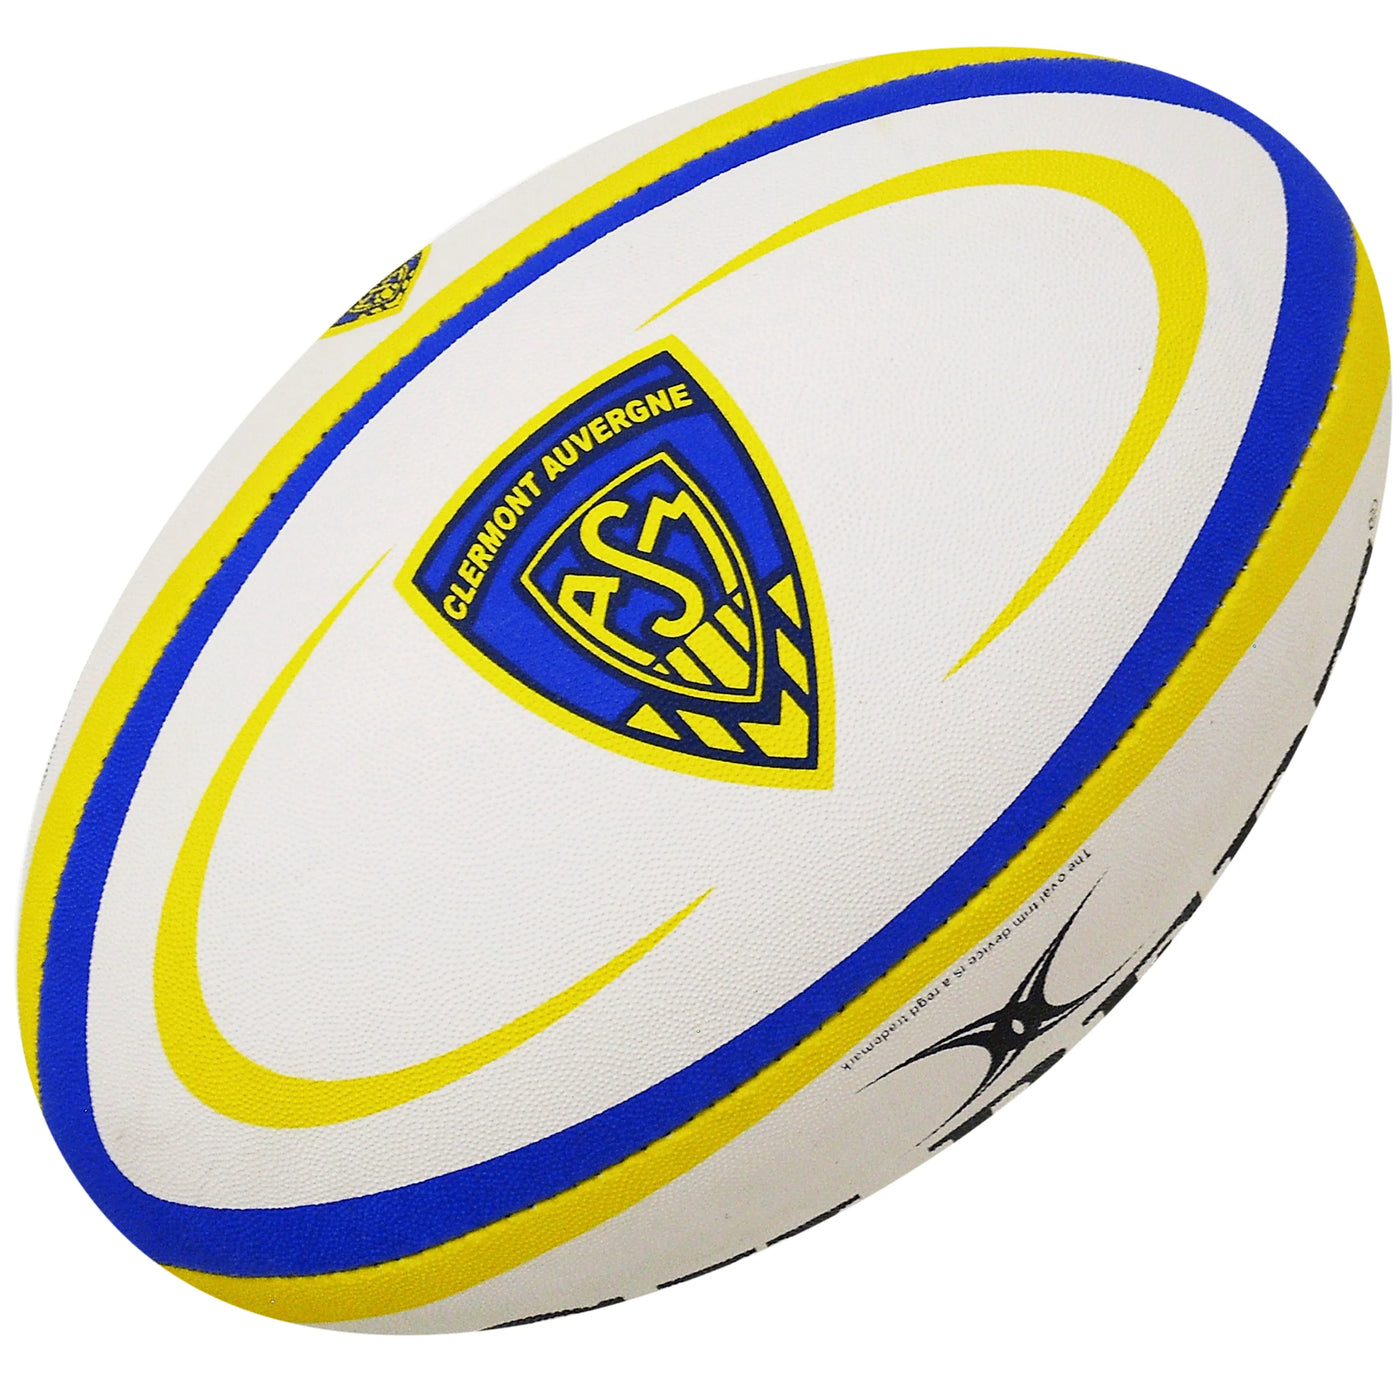 Clermont-Ferrand Replica Rugby Ball